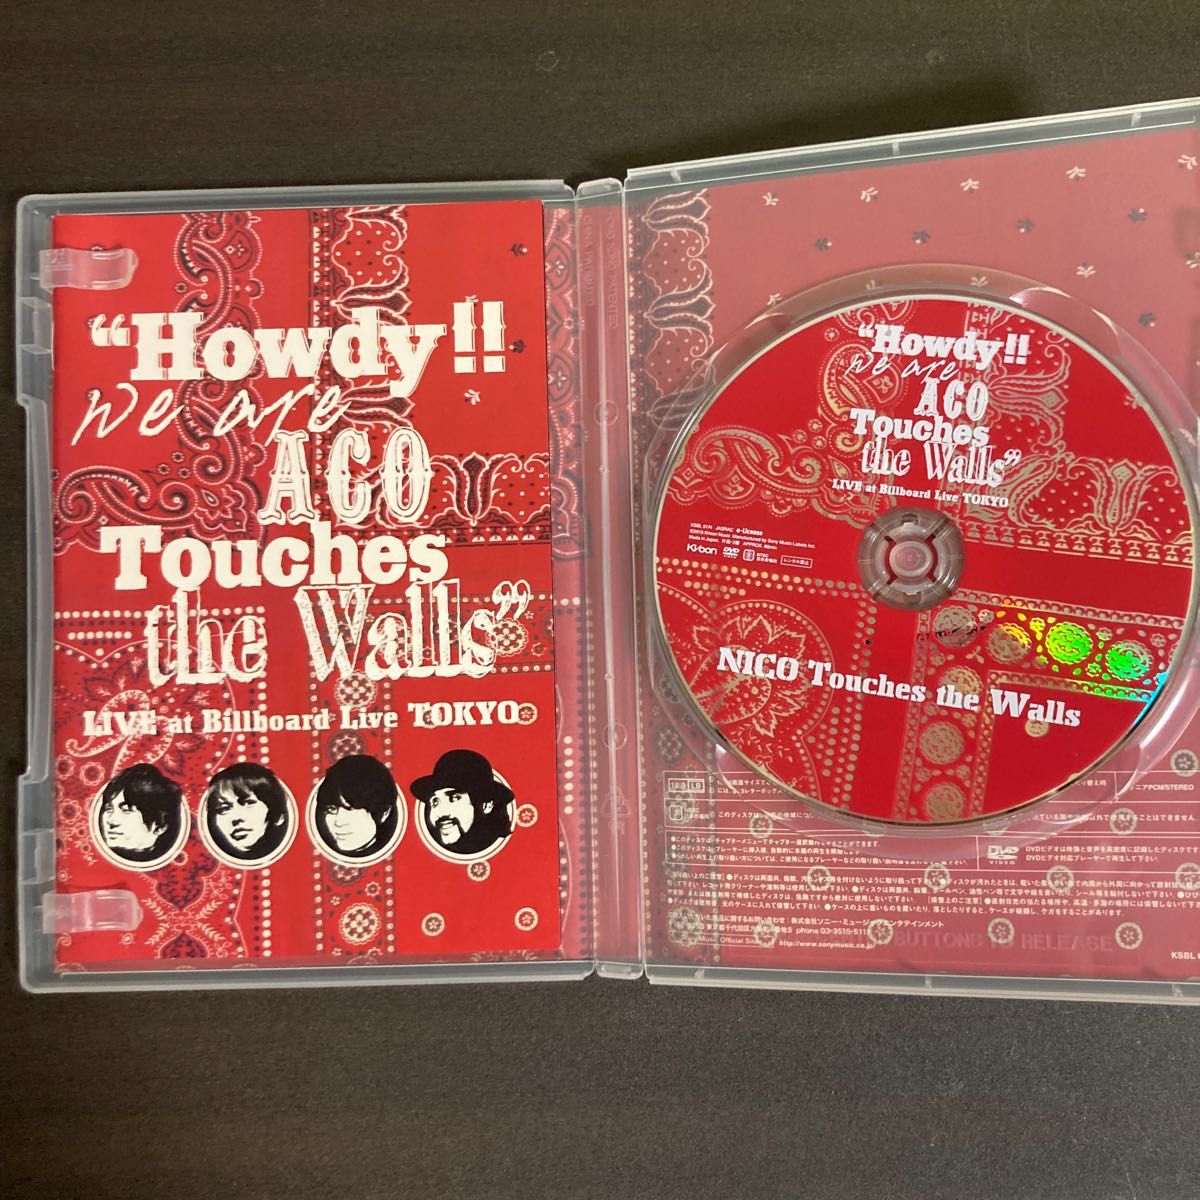 NICO Touches the Walls Howdy We are ACO Touches the Walls DVD